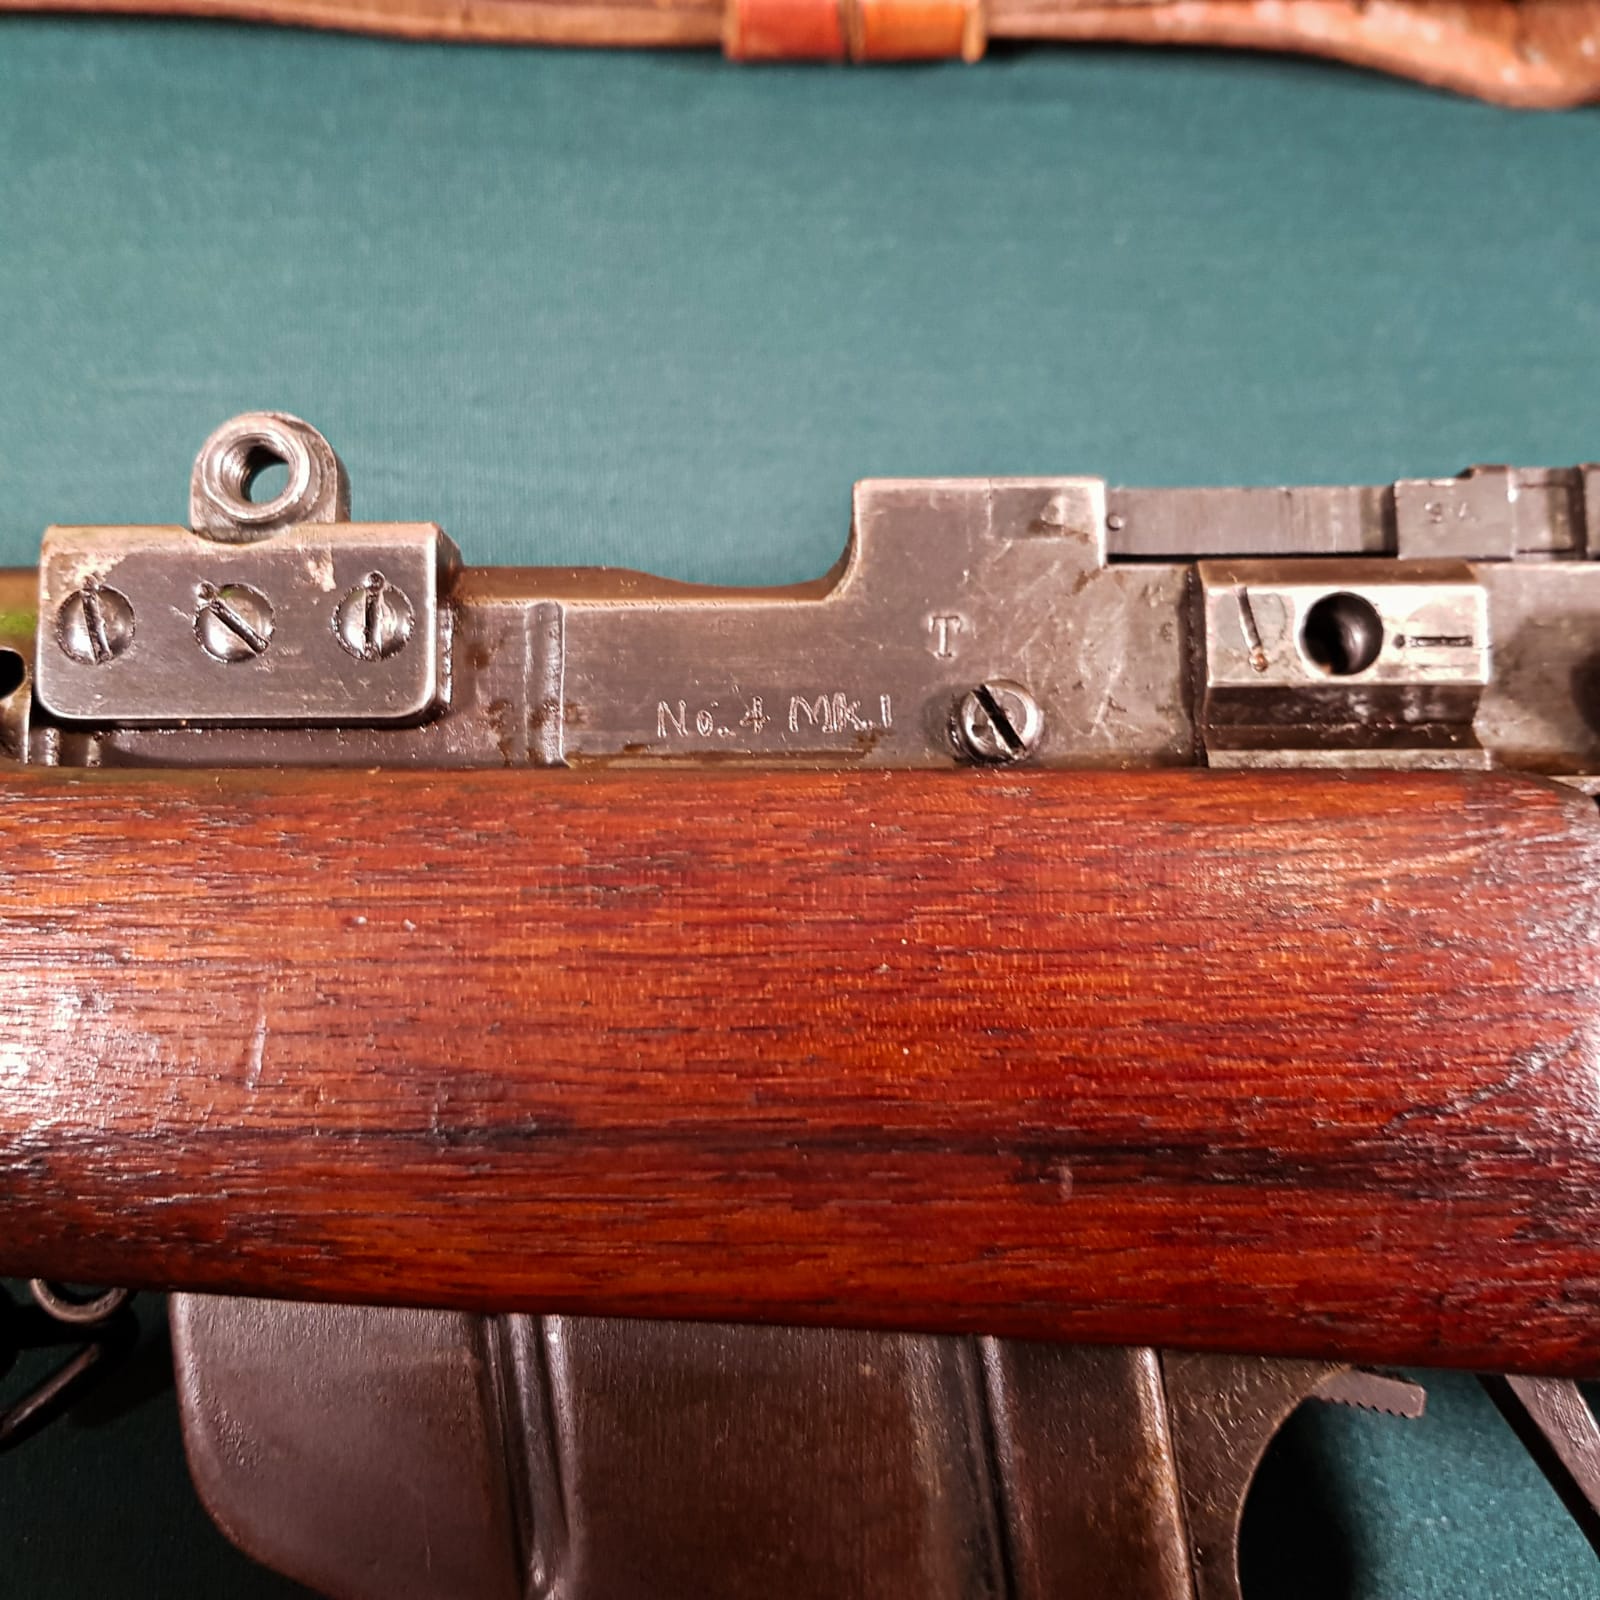 1944-BSA-Lee-Enfield-No4-Mk1T-Sniper-Rifle-with-No.32-MkII-scope-RPI-Supplies